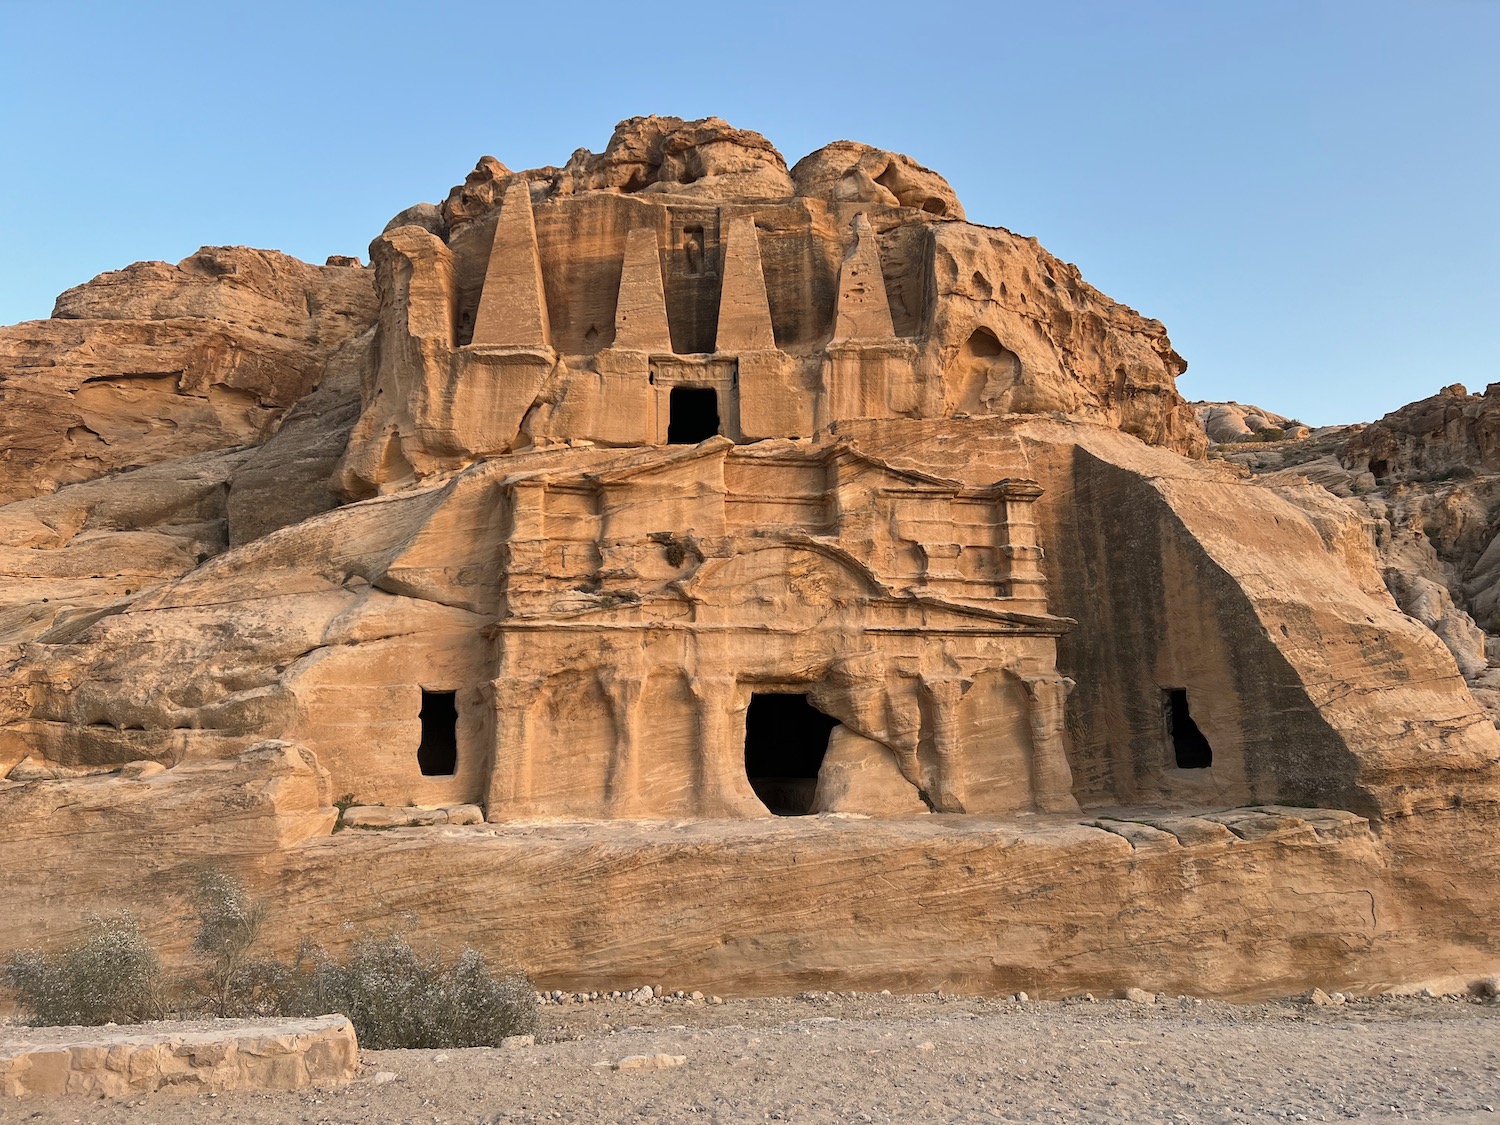 a rock structure with many windows with Petra in the background